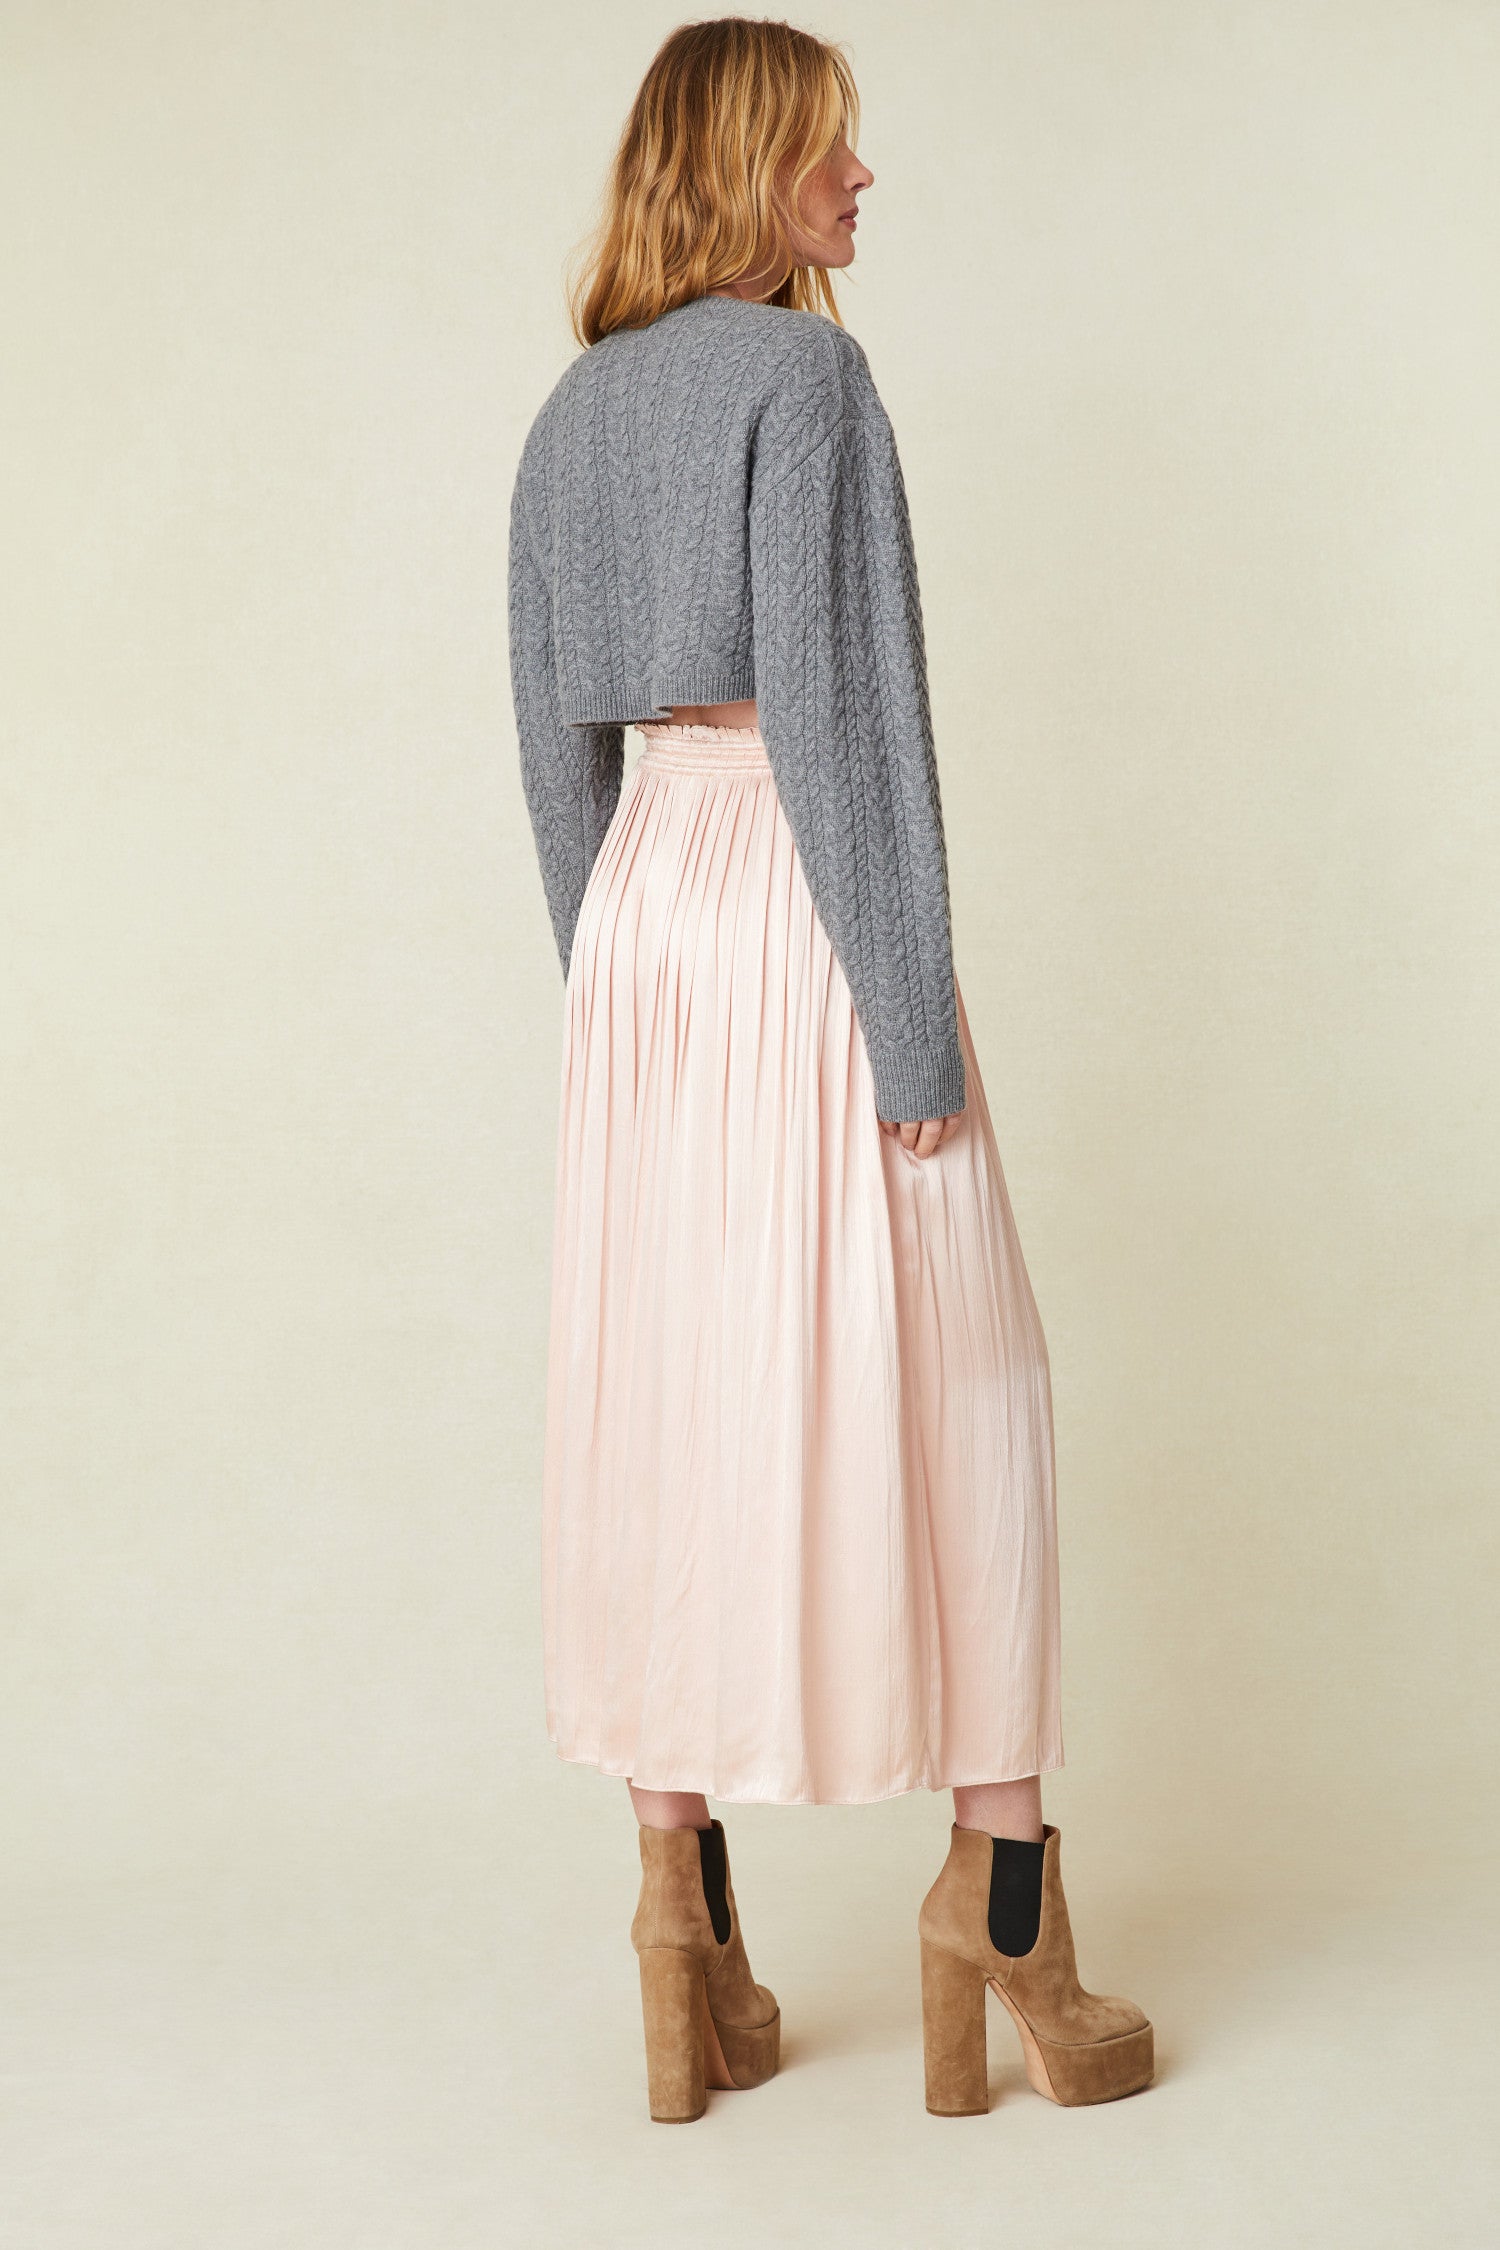 Light Pink Midi Skirt features vertical pleats that fade out at the hem, a drawstring tie at the front at the waist 